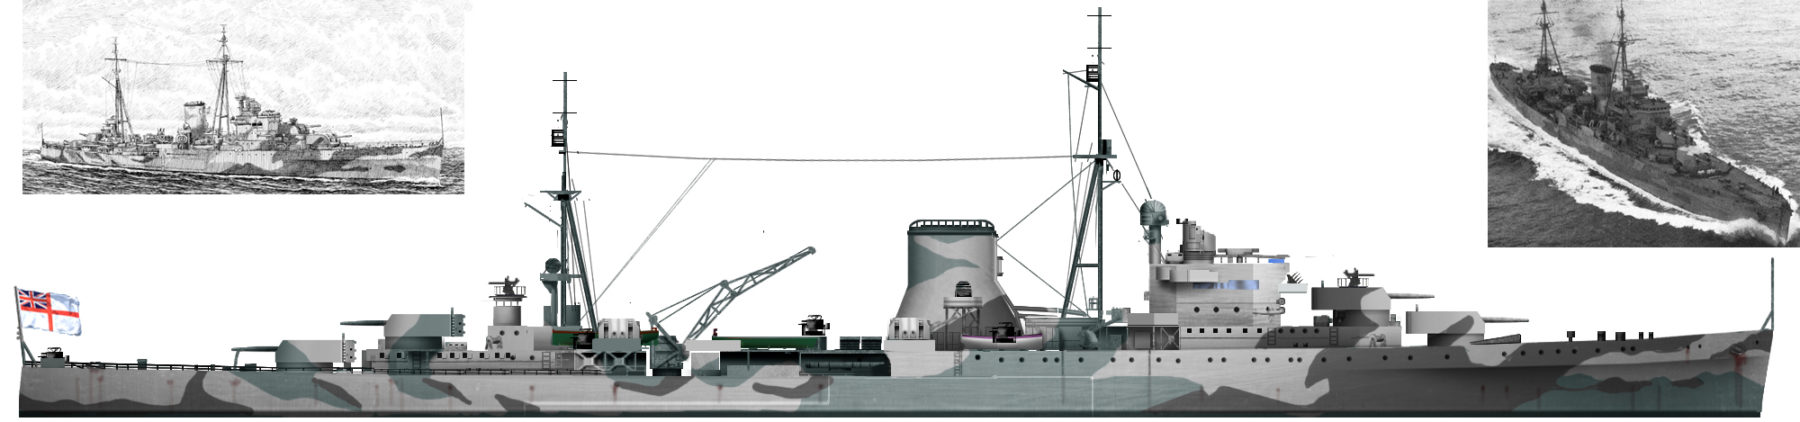 Authors HD illustration of HMS neptune in 1944